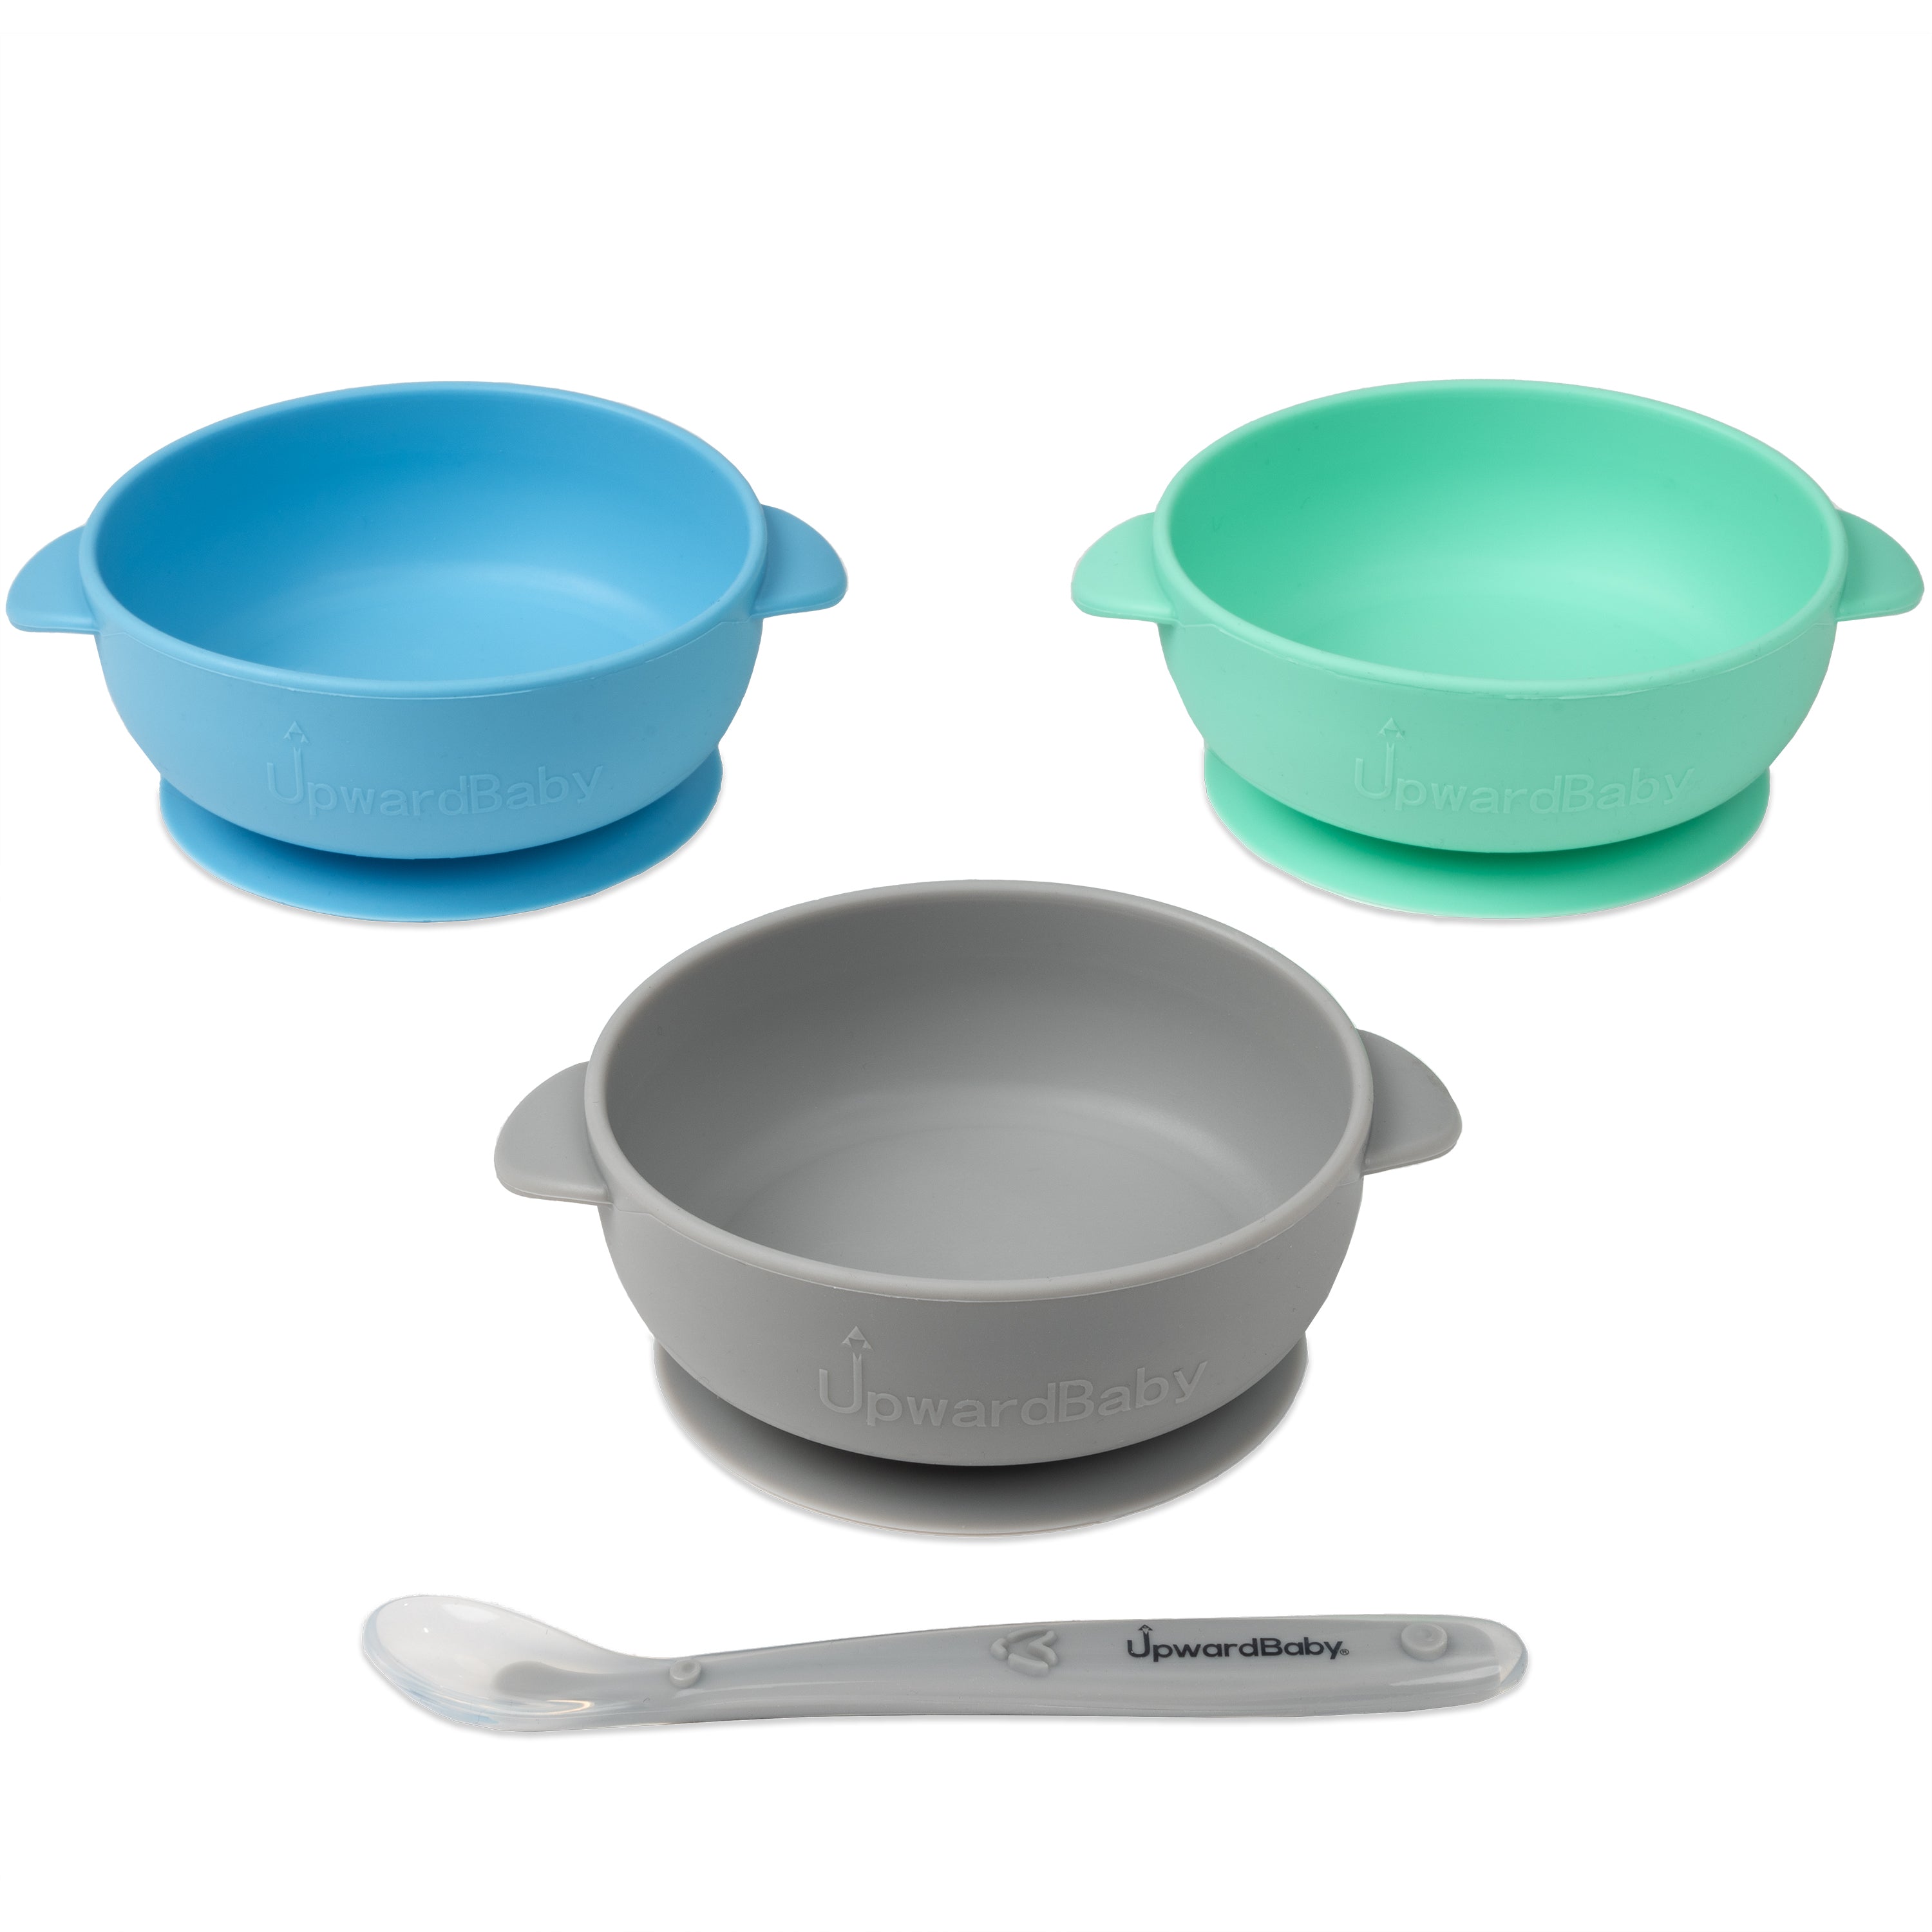 Baby Bowls with Suction - 4 Piece Silicone Set with Spoon for